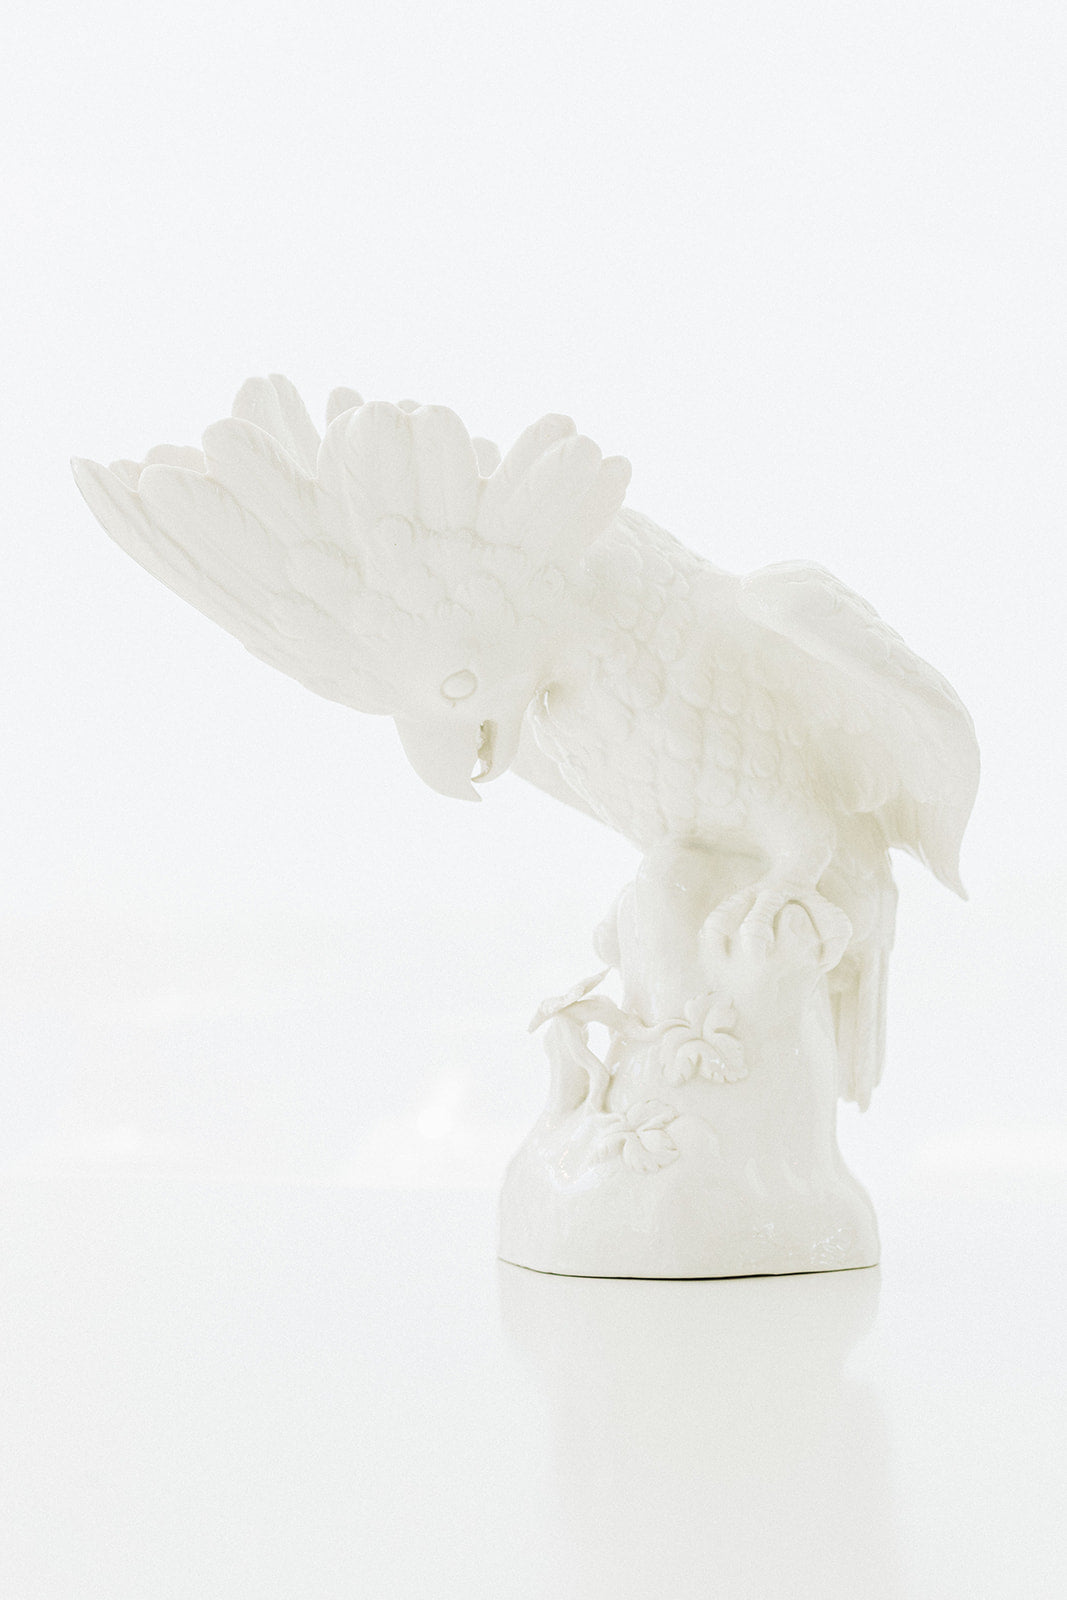 Pair of Small Nymphenburg Porcelain Cockatoos with Arched Wings Height: approx 8”